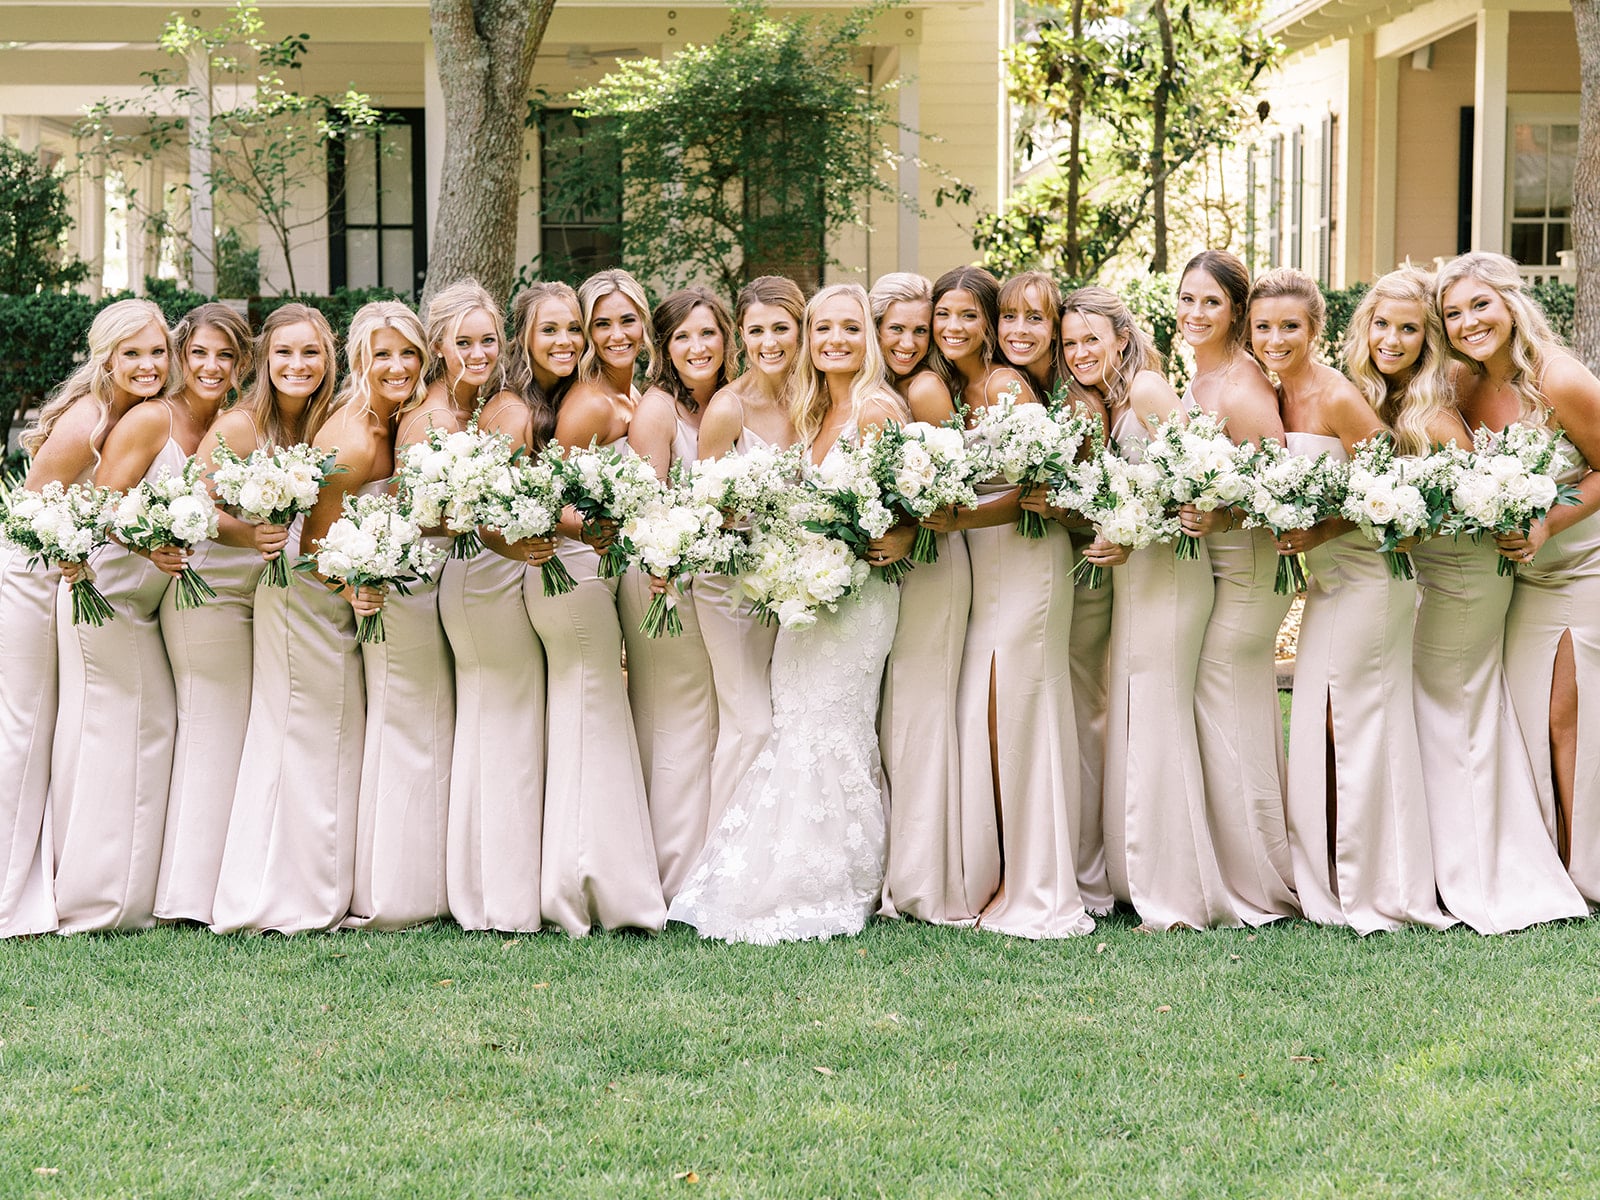 Large wedding party portrait of bridesmaids in blush pink bridesmaid dresses